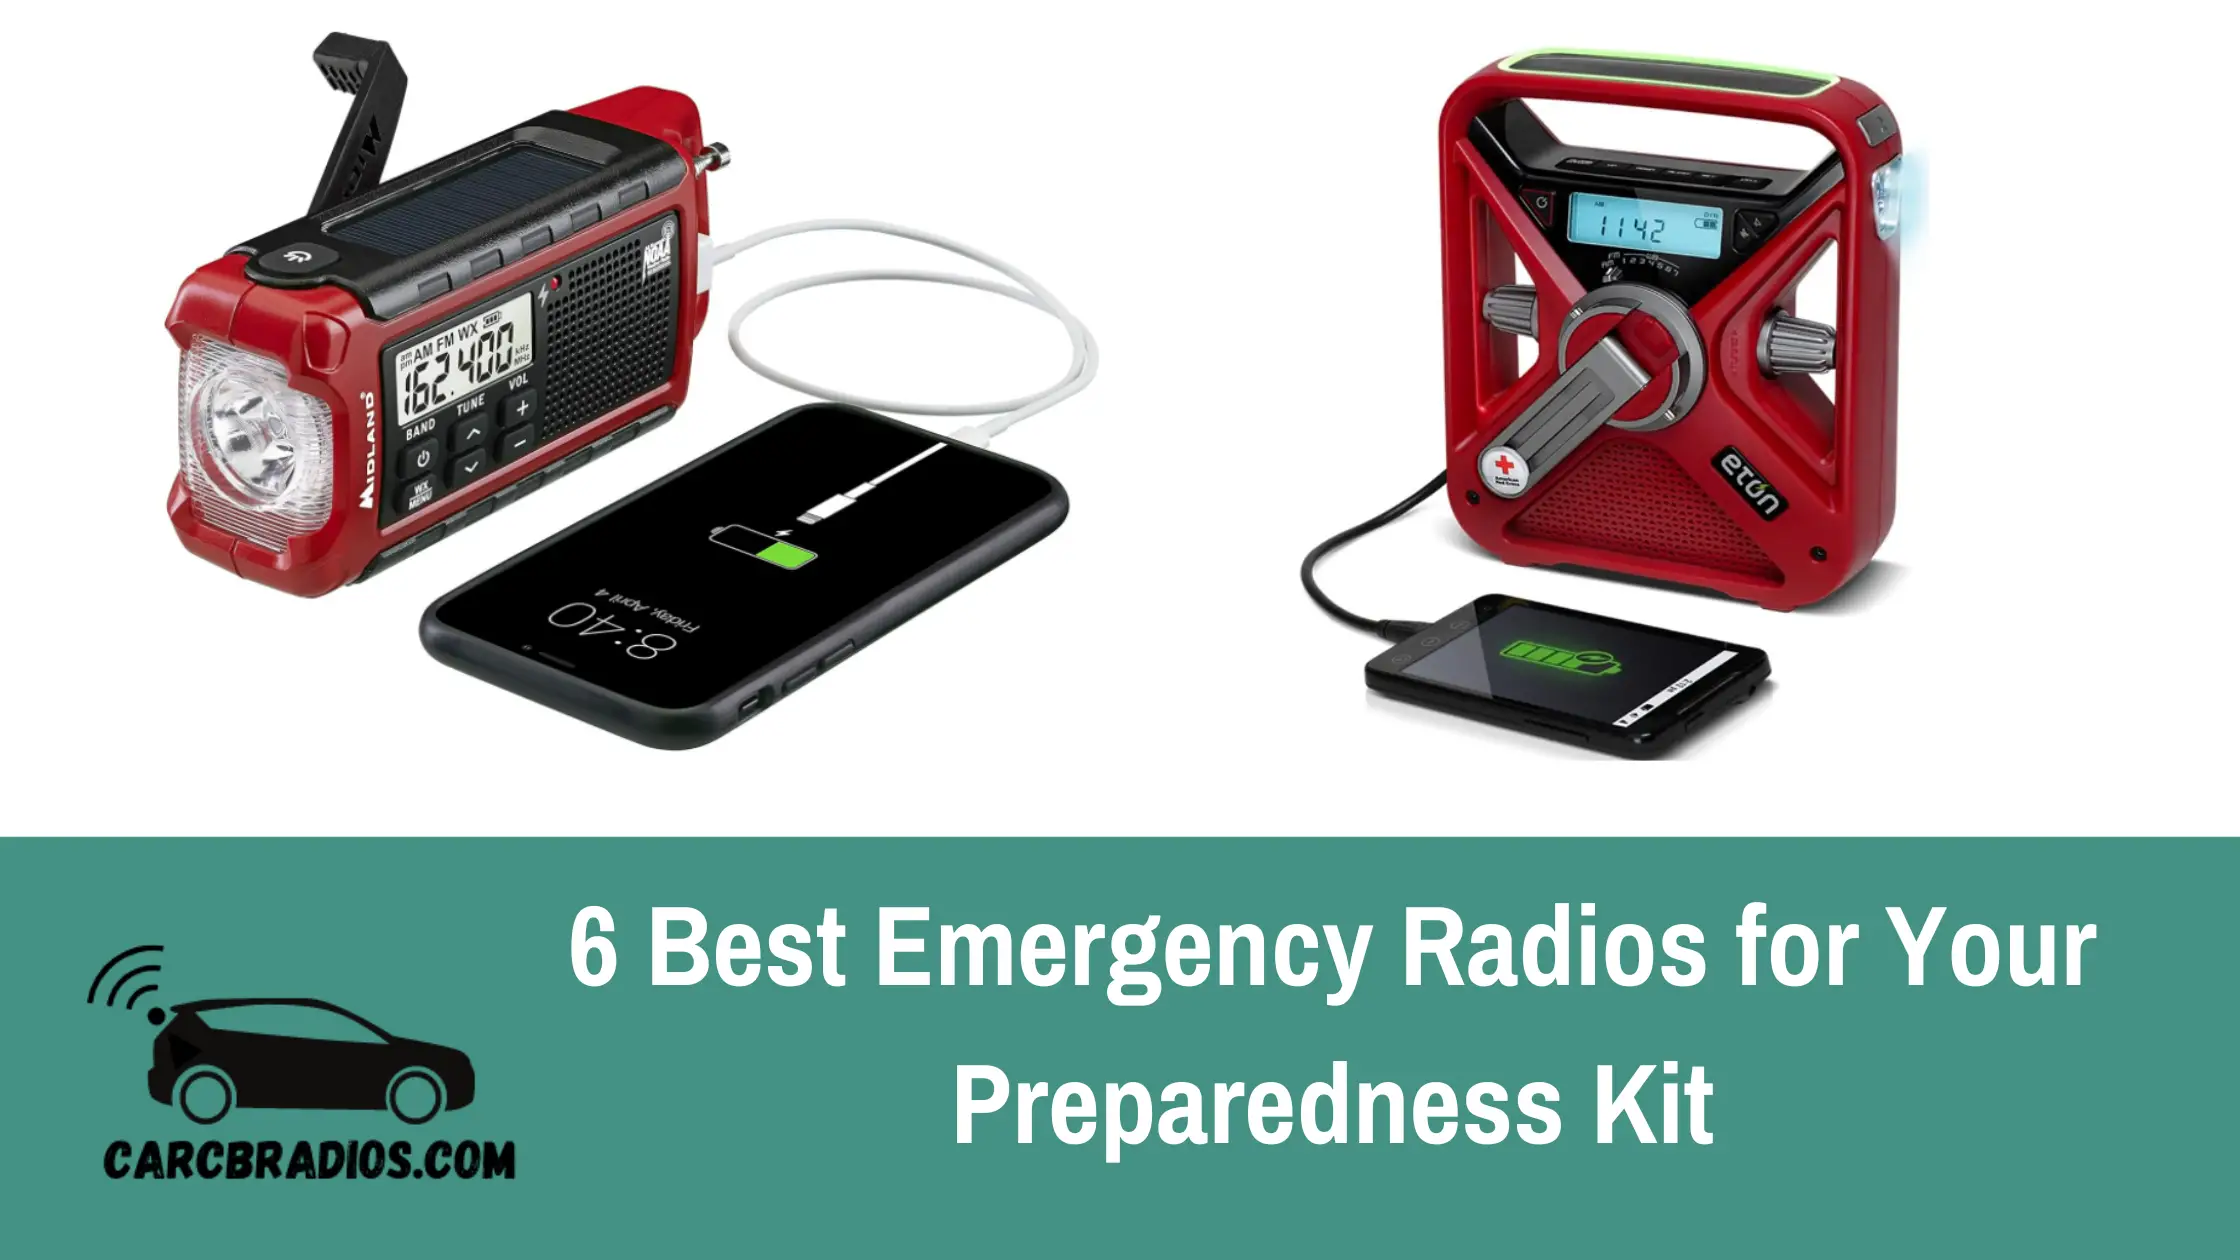 When shopping for an emergency radio, there are several key features to look for, including durability, battery life, and ease of use. To help you make an informed decision, we've compiled a list of the 6 best emergency radios on the market today. From the Midland ER210 Weather Alert Crank Radio to the Eton Emergency NOAA Weather Radio, these devices offer a range of features and functionality to keep you safe and informed in times of crisis.